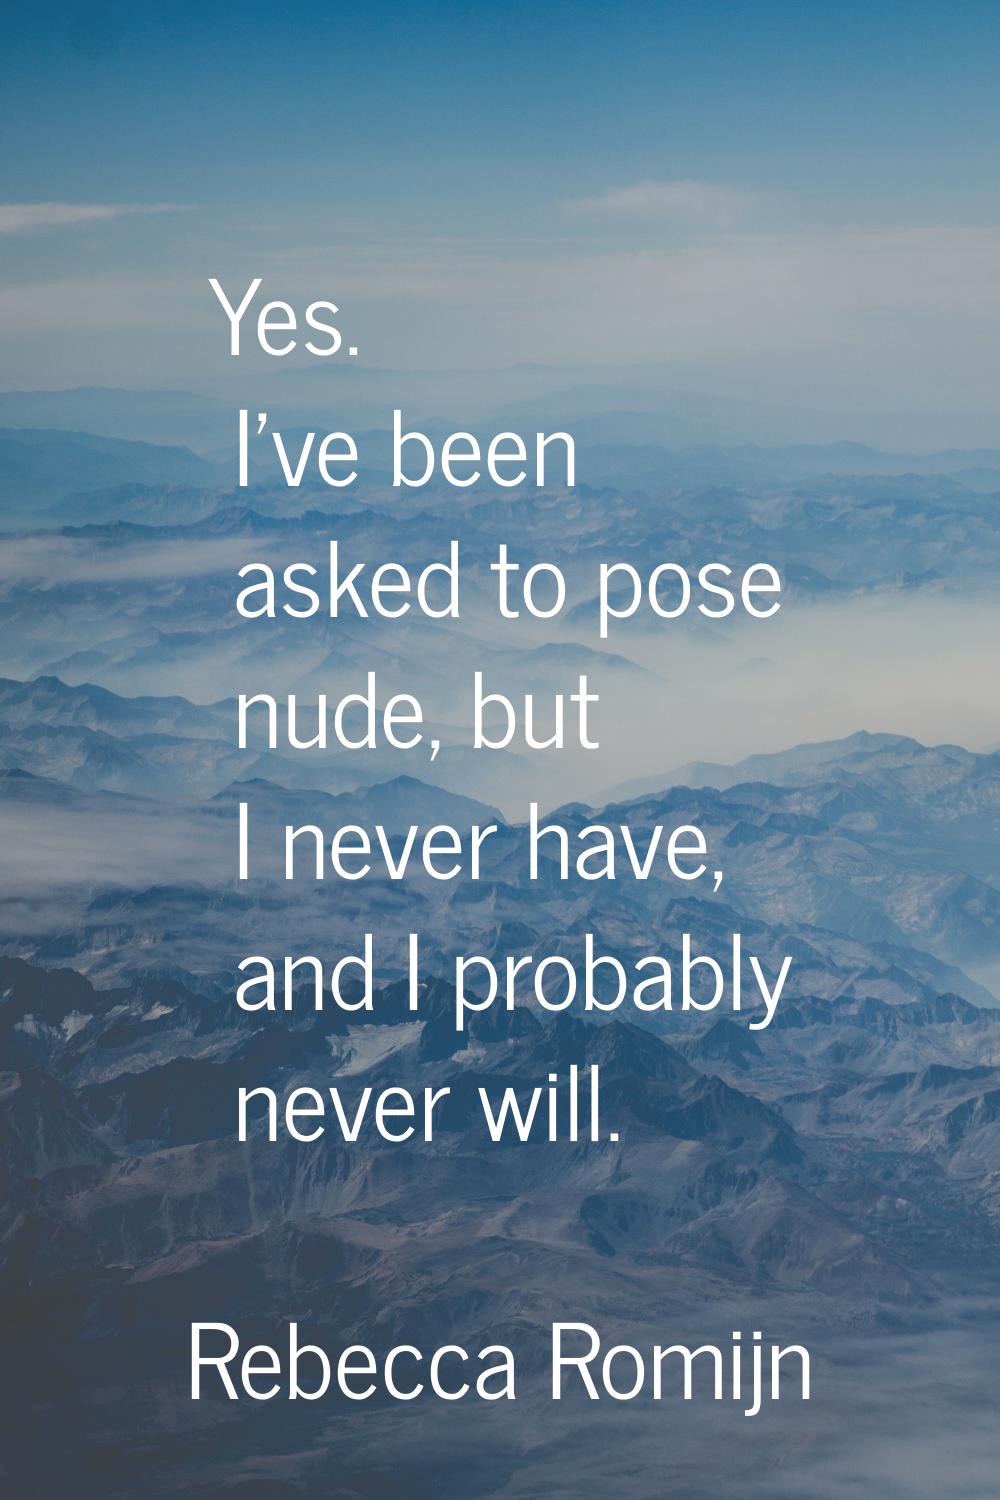 Yes. I've been asked to pose nude, but I never have, and I probably never will.